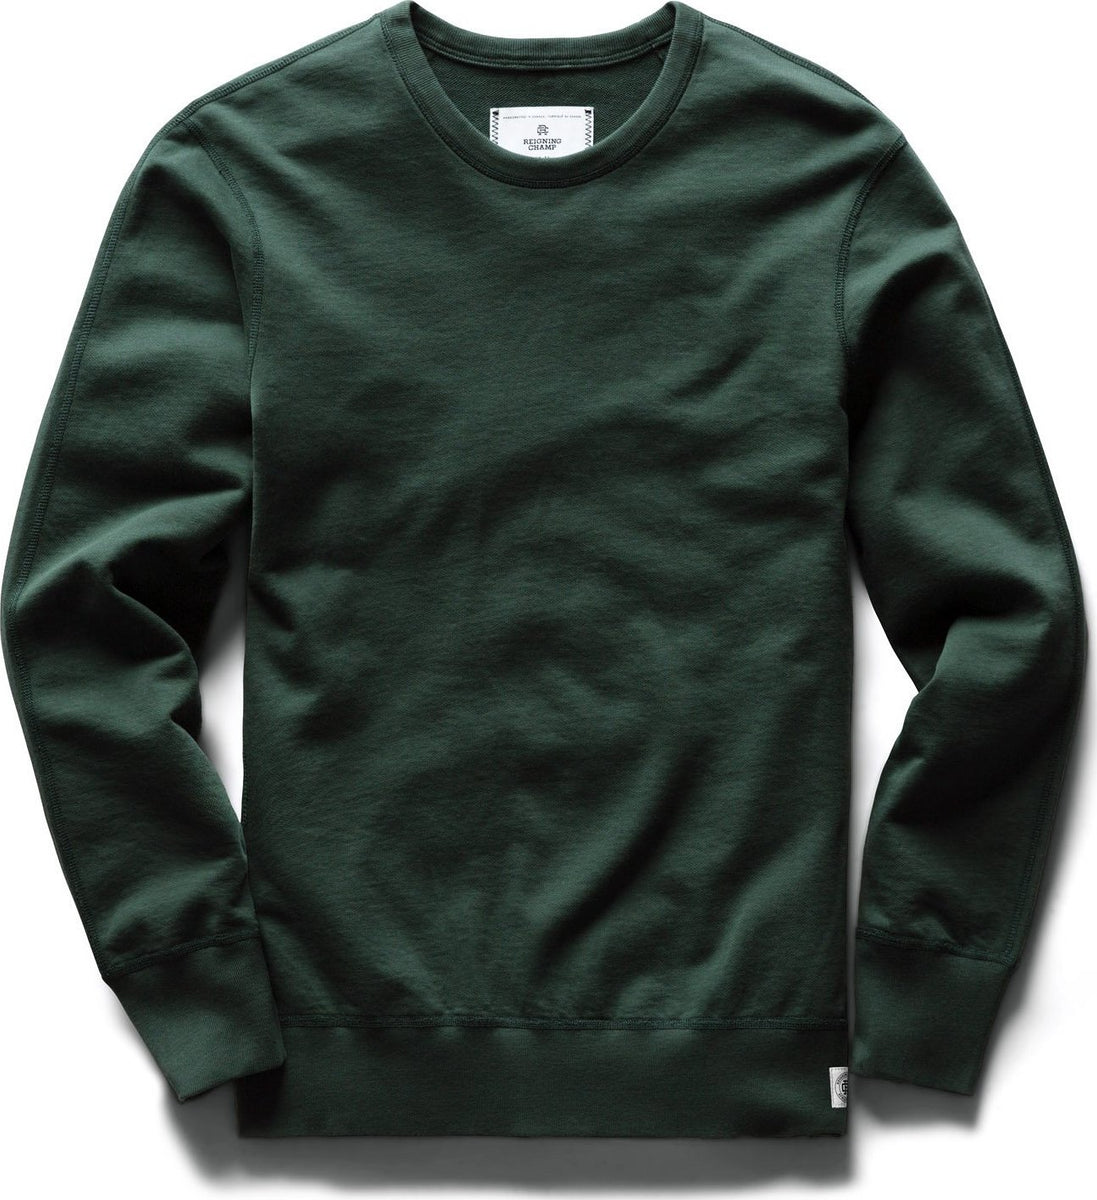 Reigning Champ Classic Crewneck - Mid Weight Terry - Men's | Altitude ...